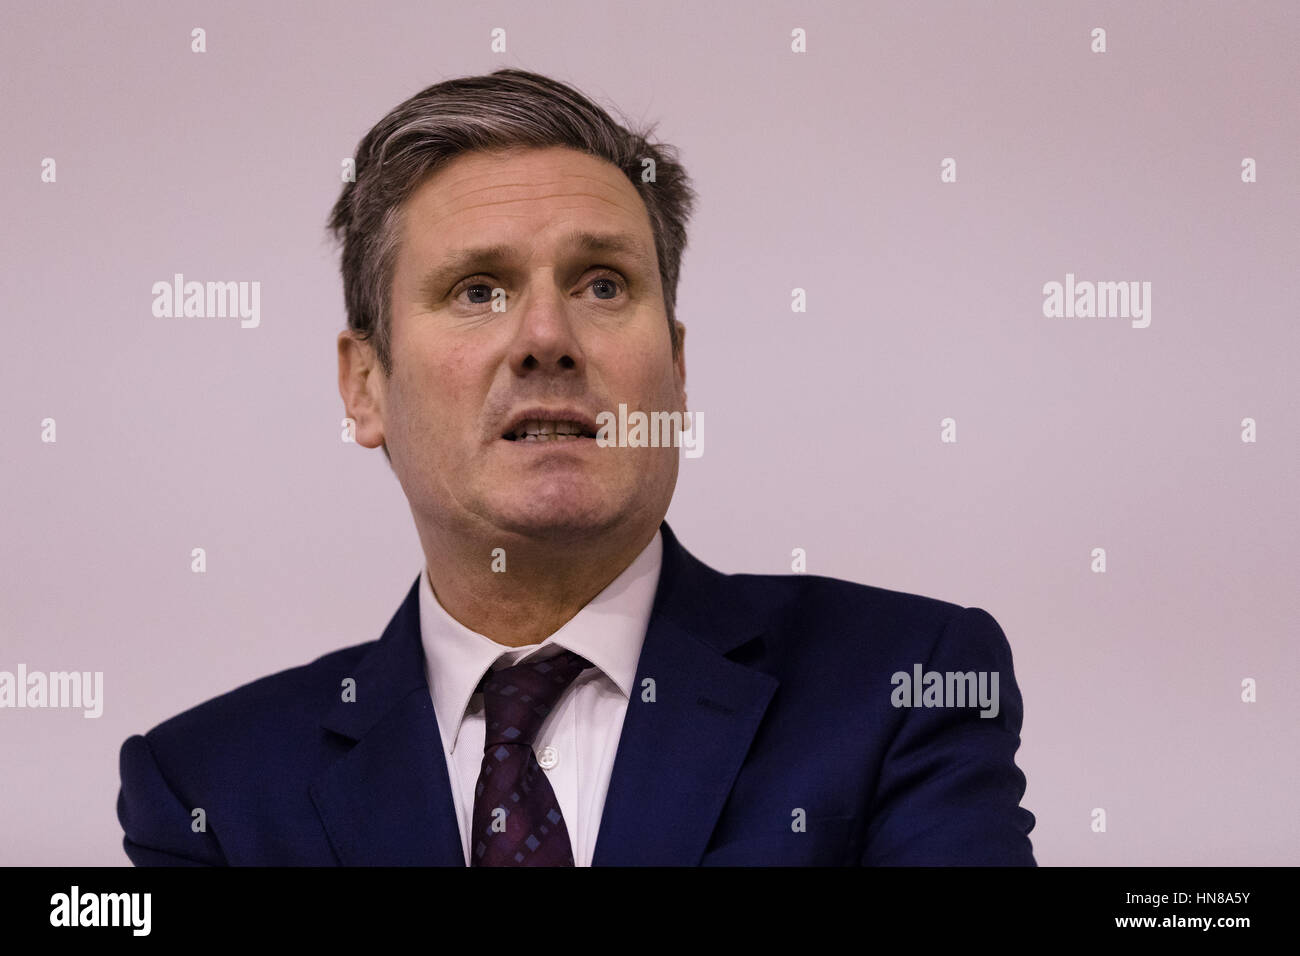 London, UK. 9th Feb 2017. Shadow Secretary of State for Exiting the European Union (Brexit), Sir Keir Starmer MP, gives a speech about 'Human Rights after Brexit' at the Eleanor Roosevelt Lecture at UCL Institute of the Americas in London. Credit: Vickie Flores/Alamy Live News Stock Photo